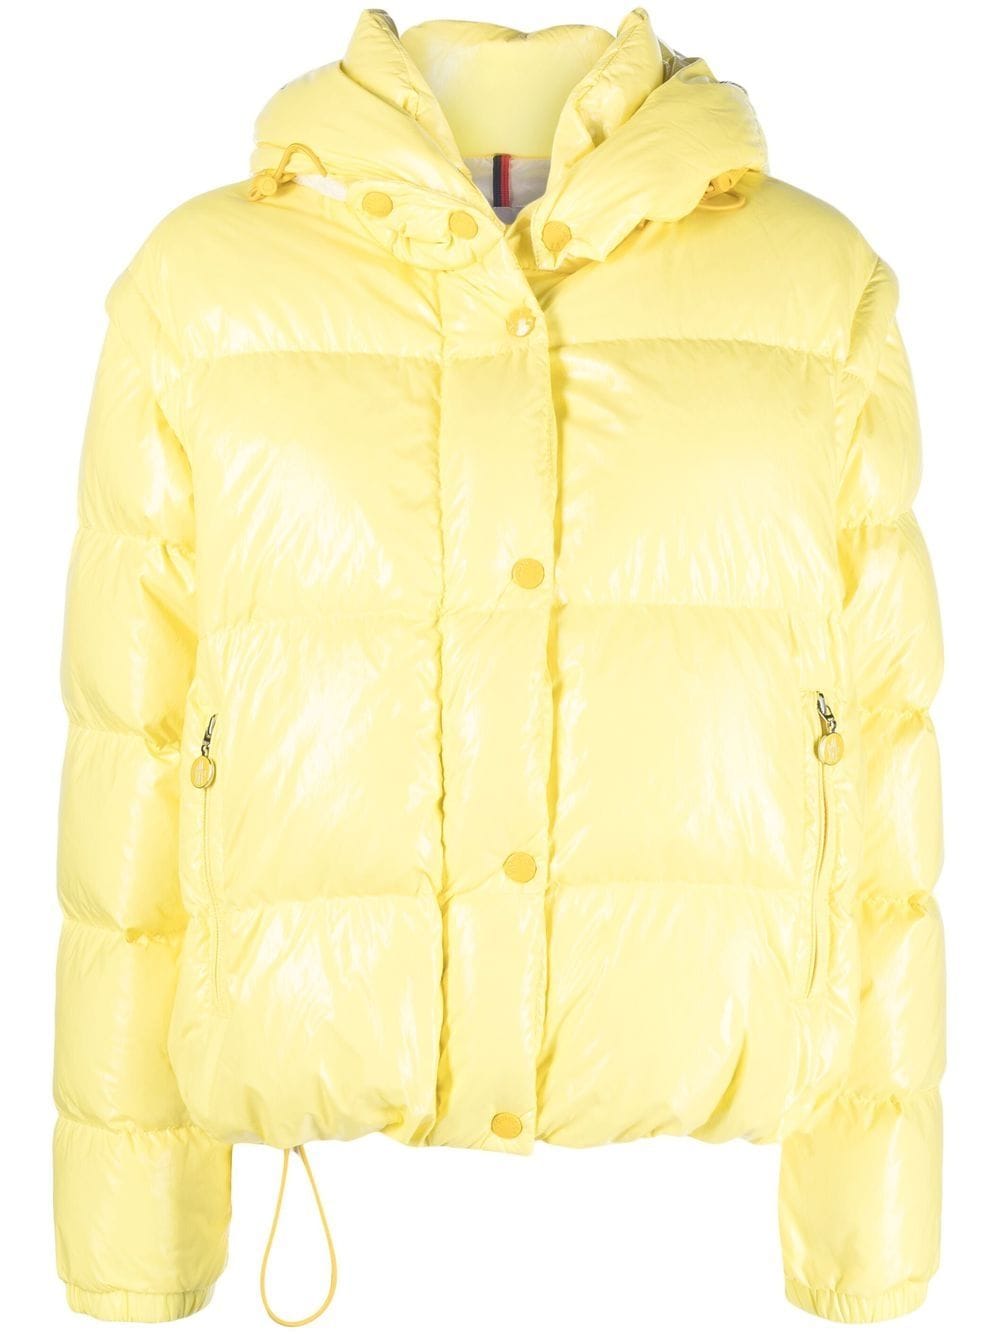 Moncler Yellow Hooded Puffer Jacket von Moncler